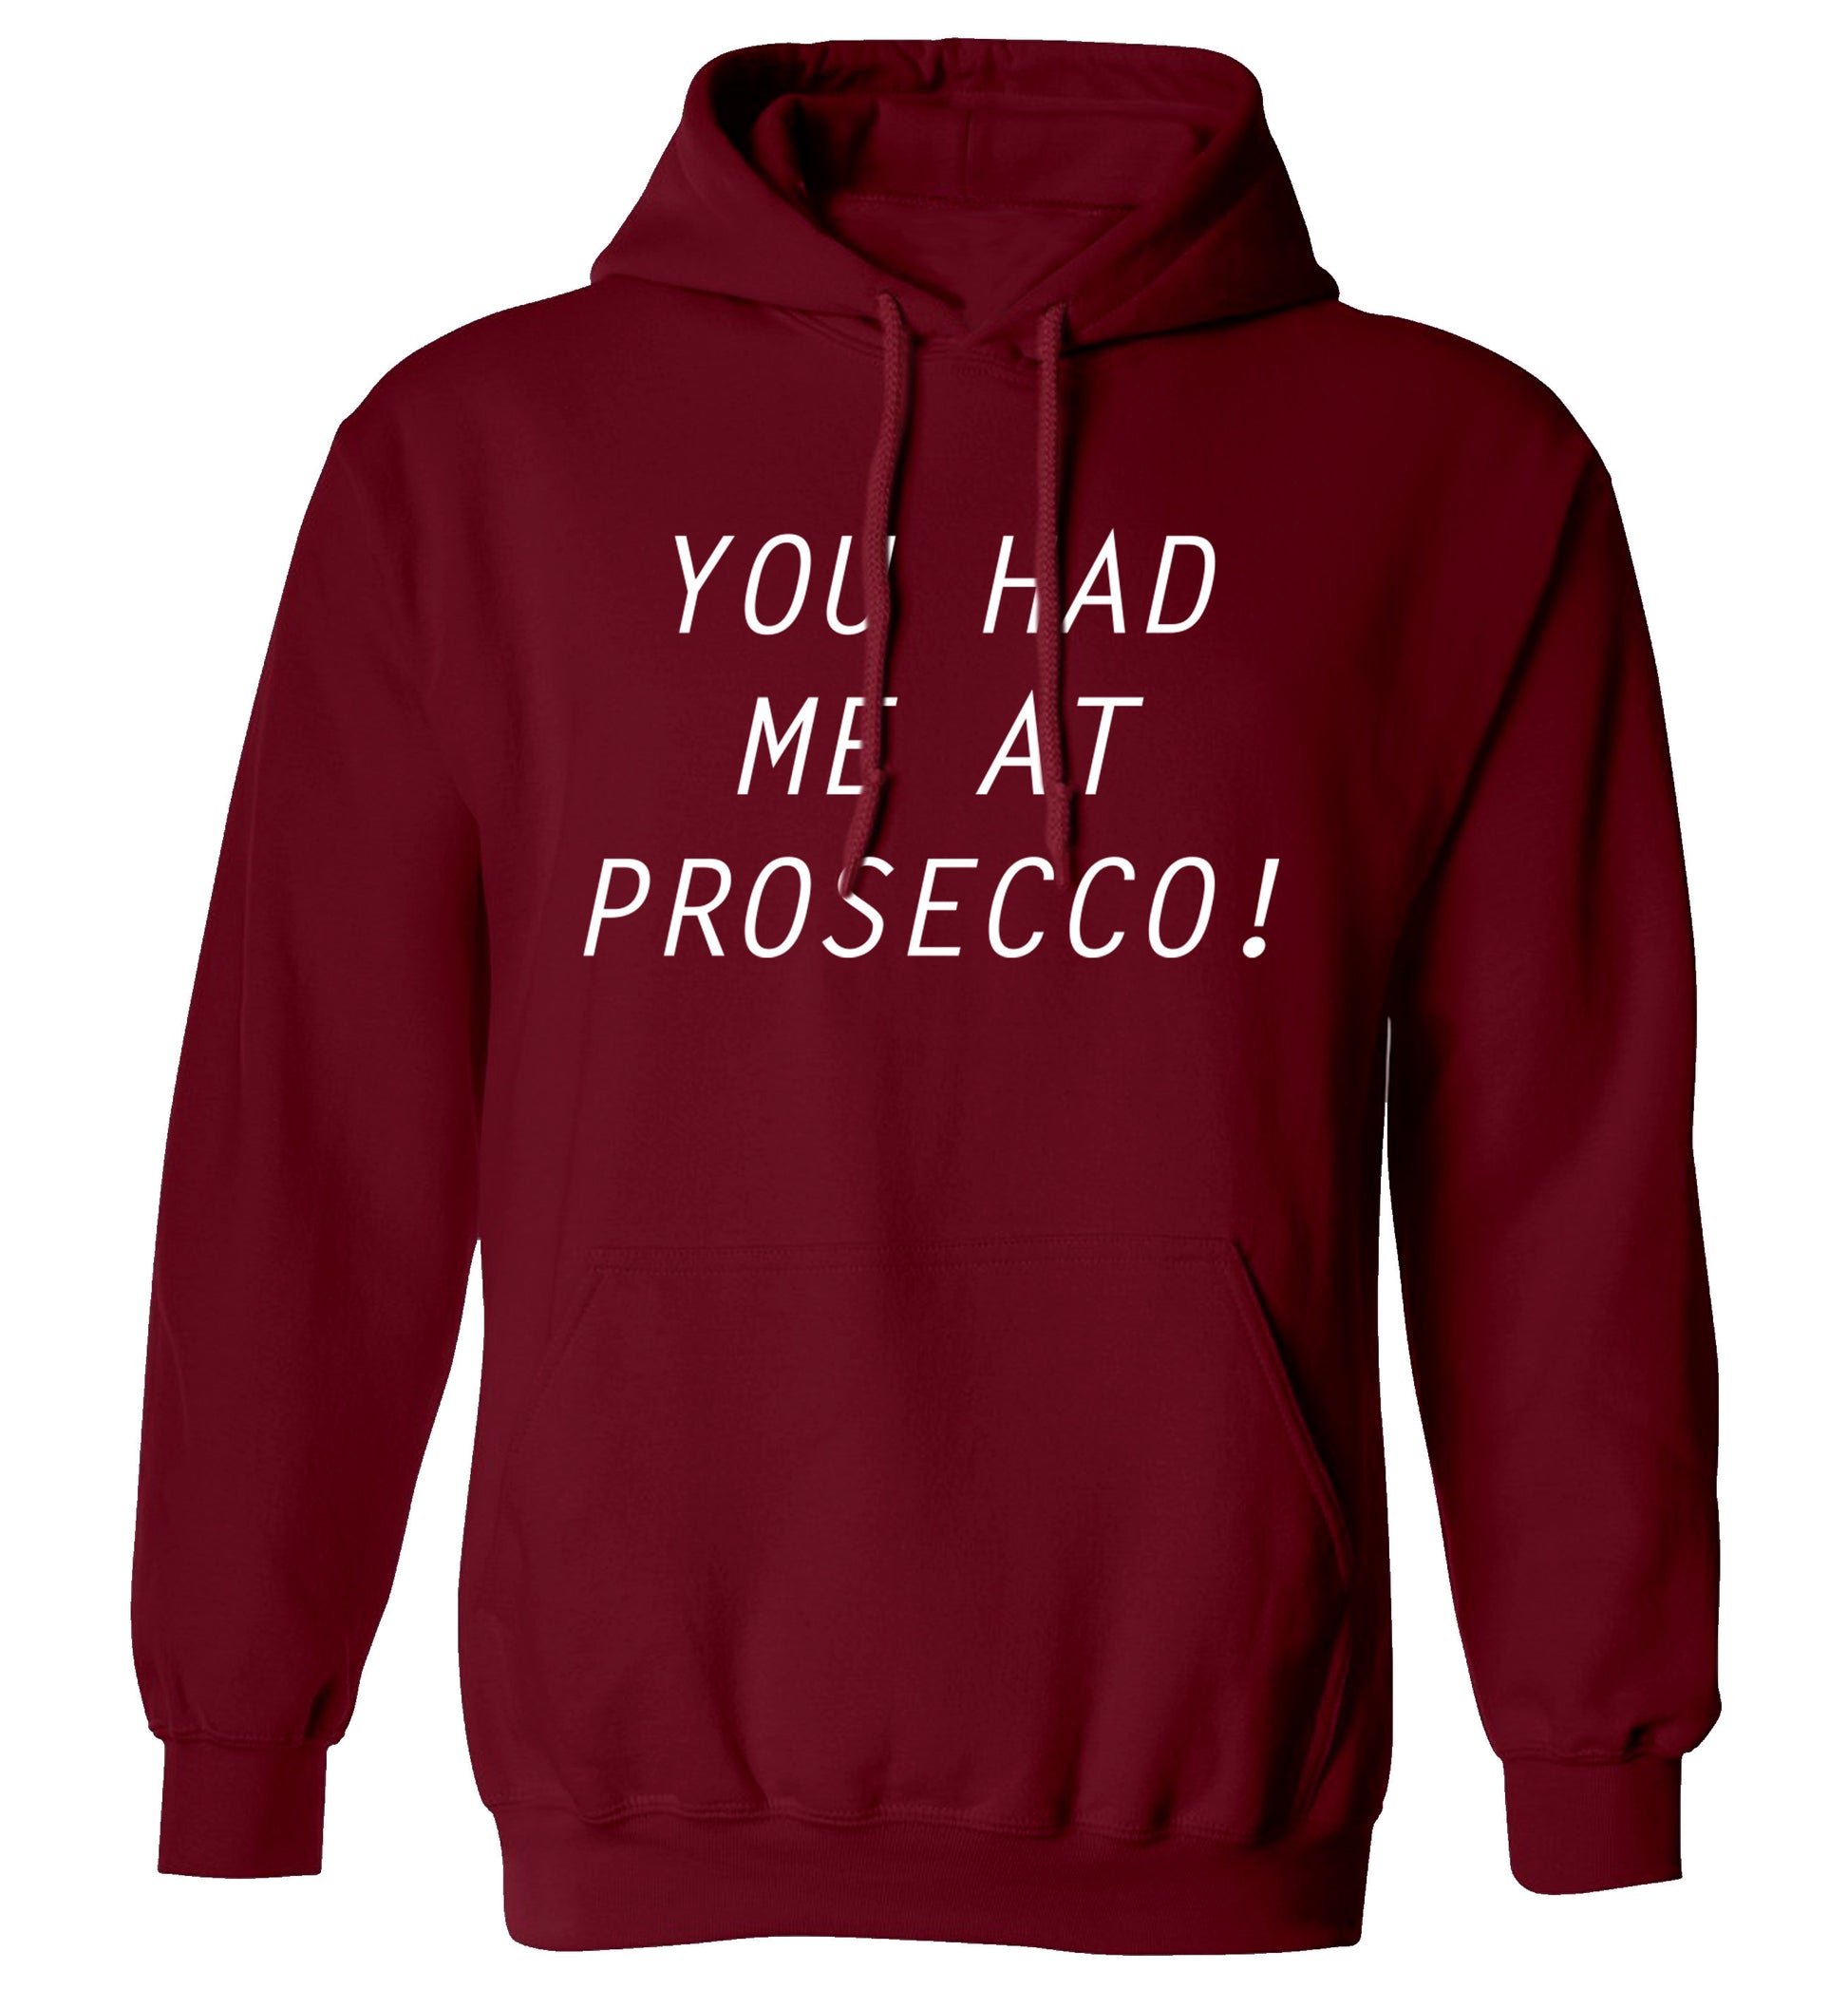 You had me at prosecco adults unisex maroon hoodie 2XL